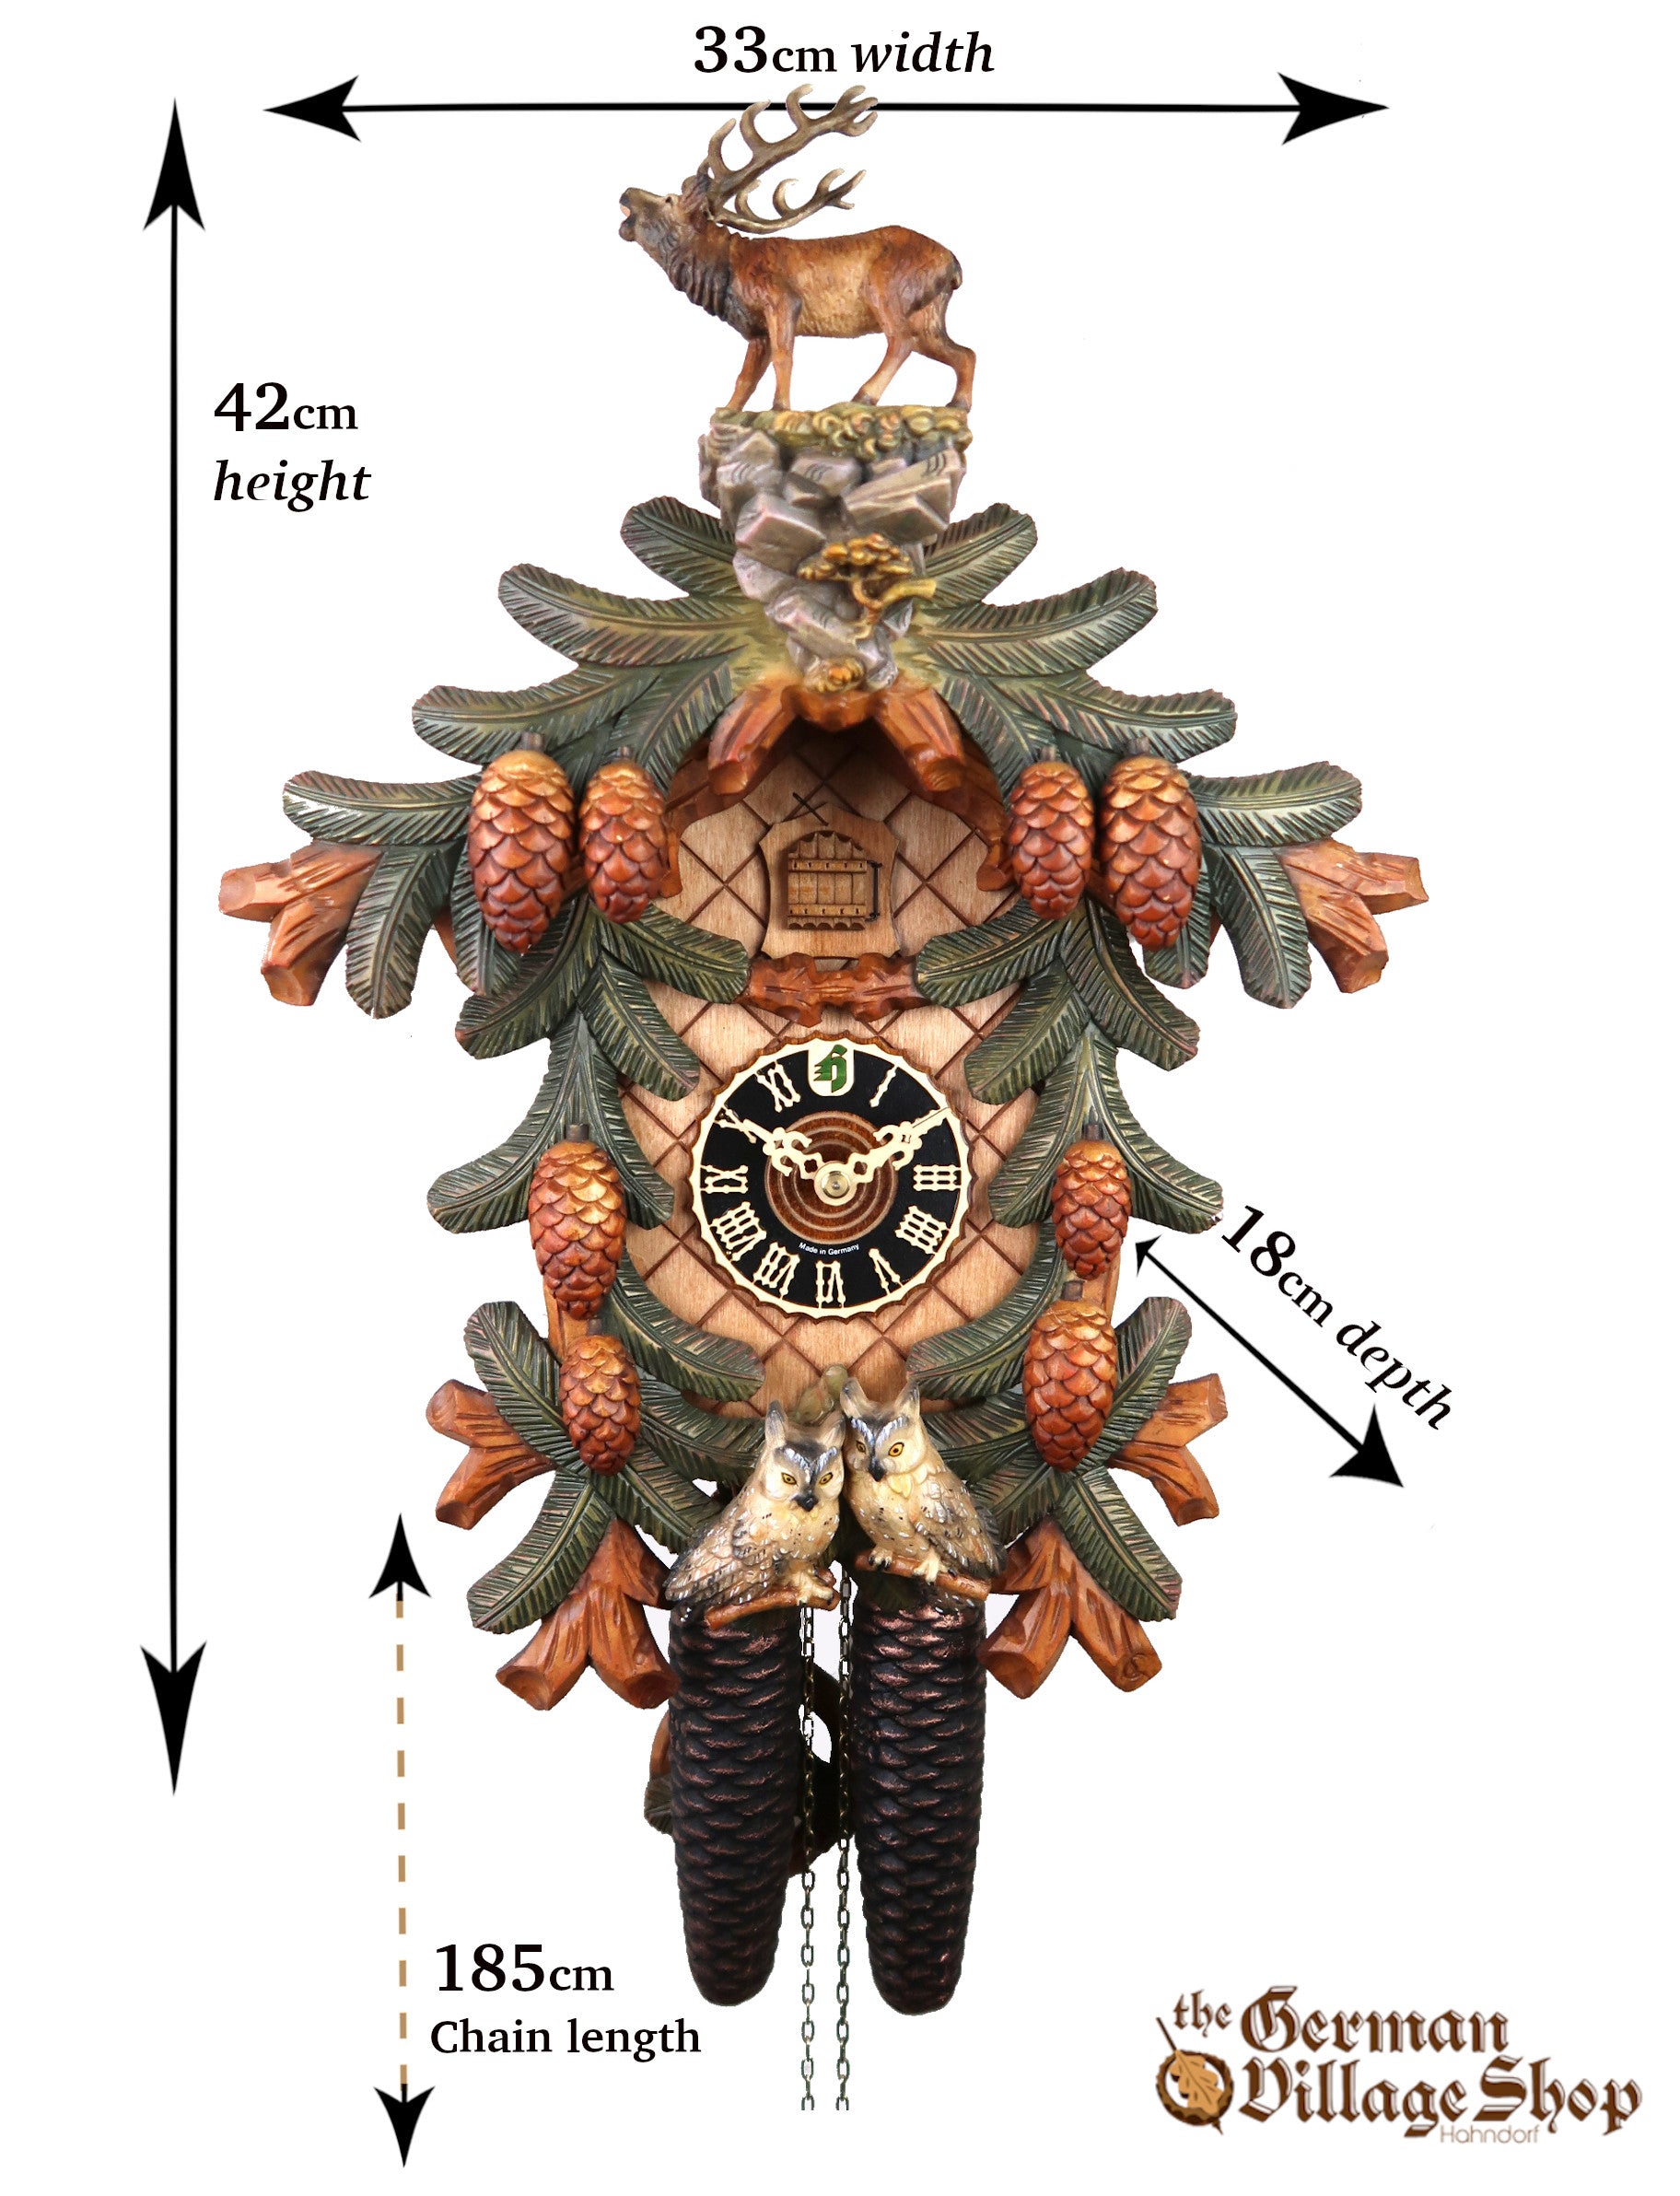 Size of a German Cuckoo Clock imported and for sale in Australia